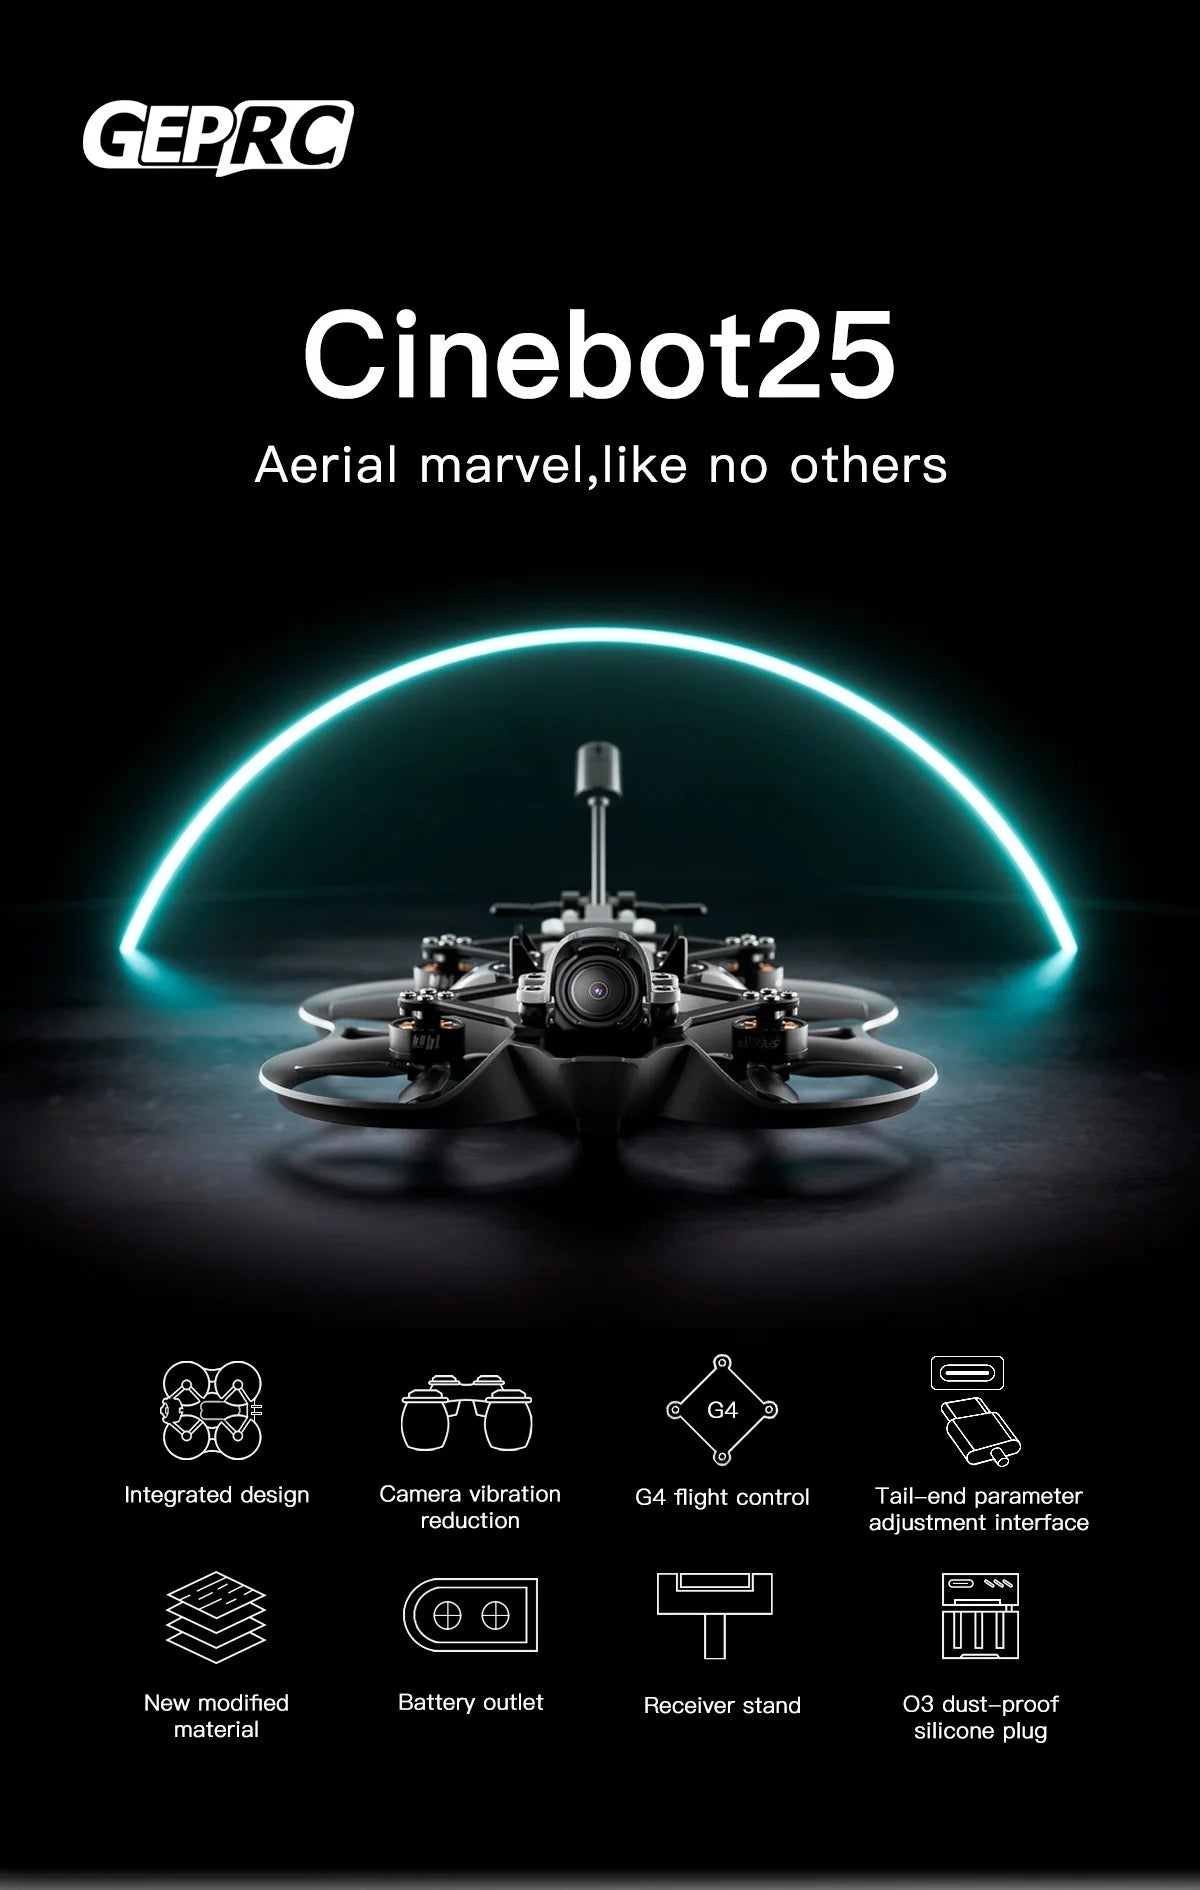 GEPRC Cinebot25 HD Wasp FPV Drone, GEPRC Cinebot25 Aerial marvel,like no thers buhl